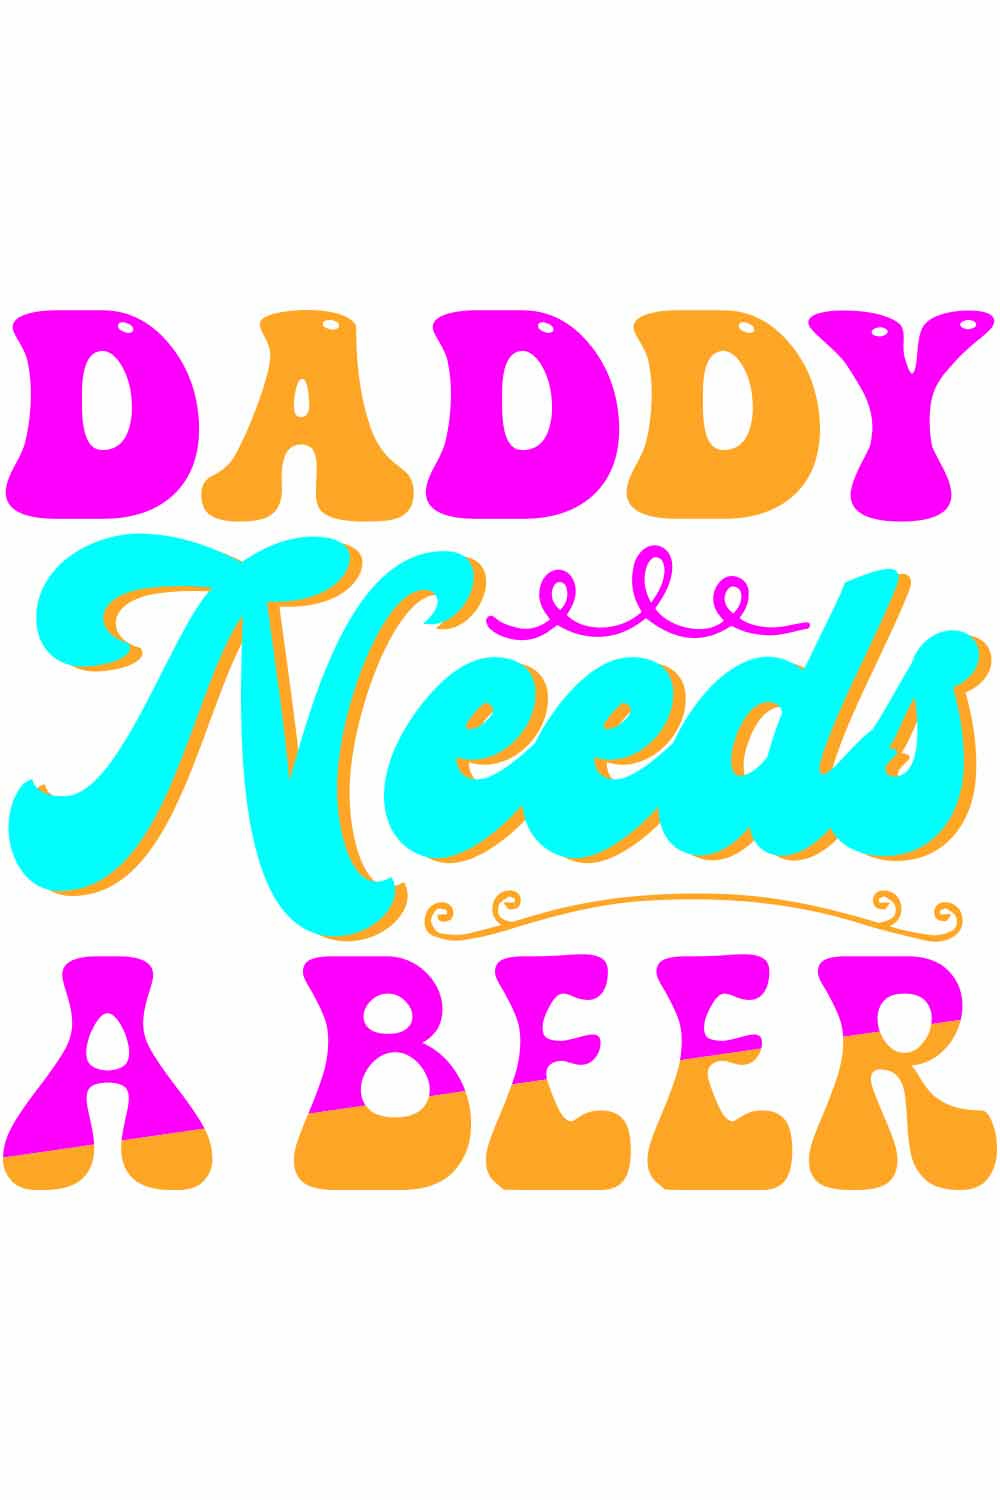 Daddy needs a beer Retro t-shirt Designs pinterest preview image.